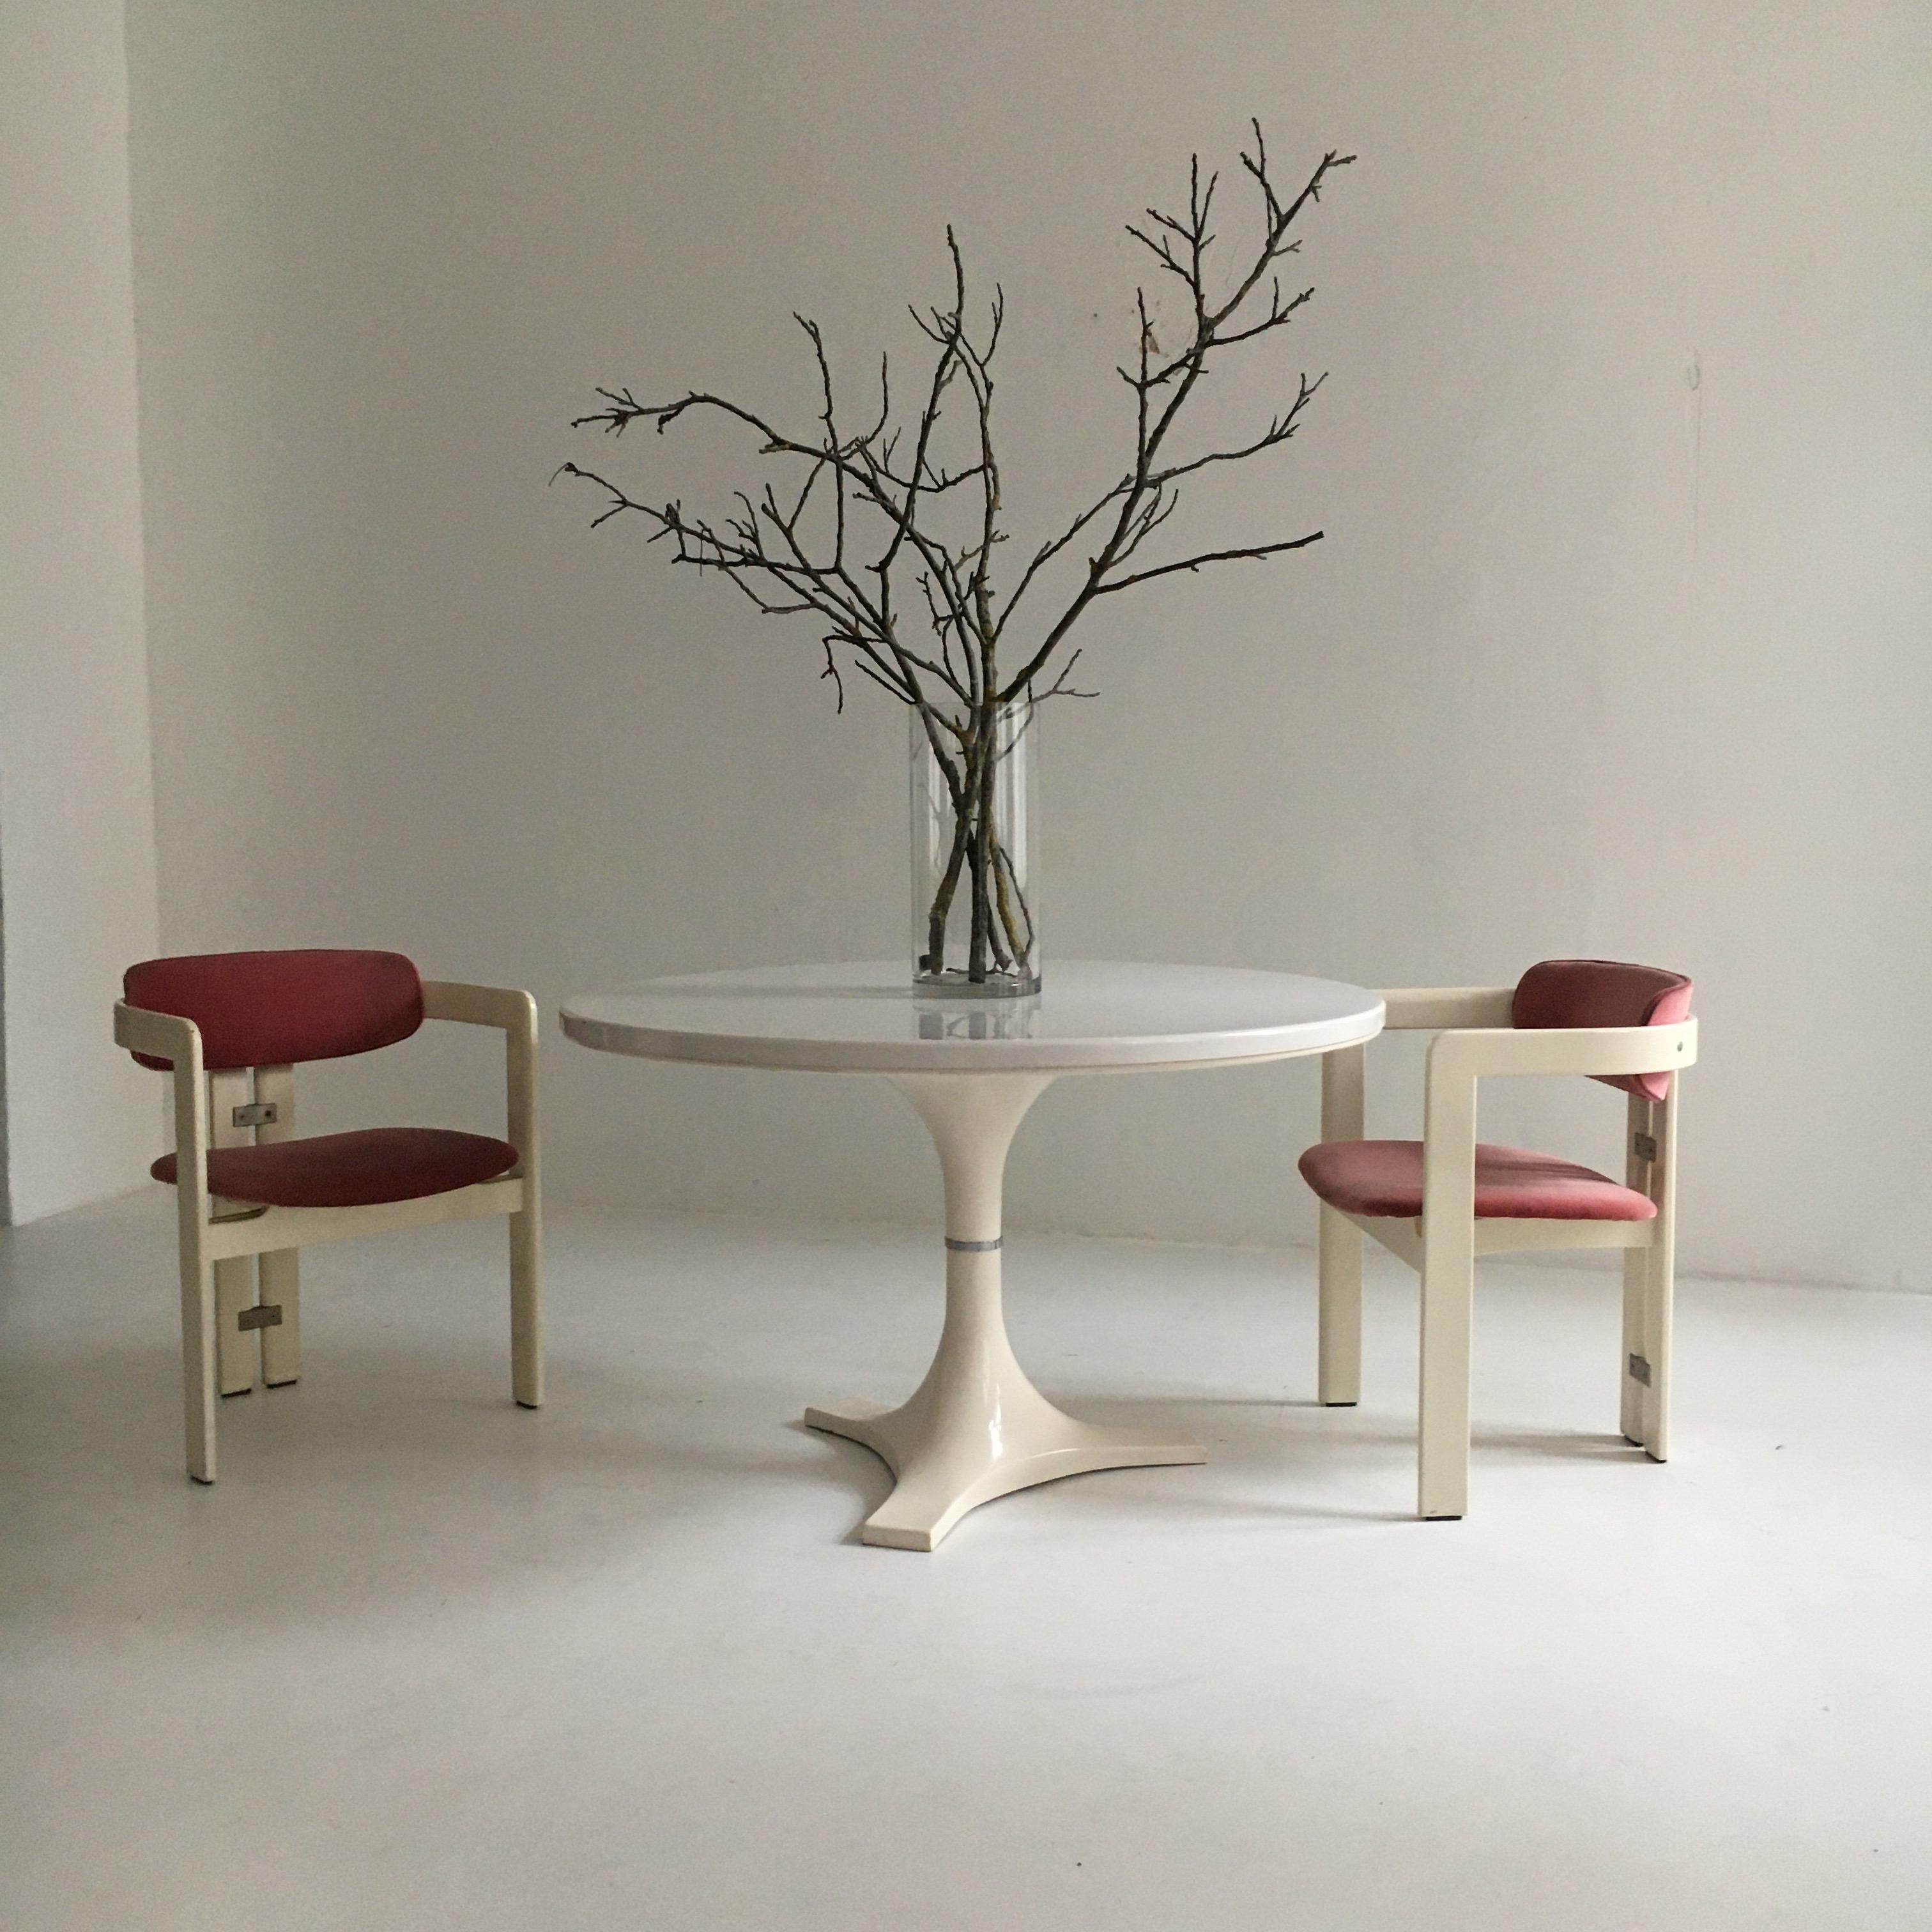 Mid-20th Century Dining Table by Anna Castelli Ferrieri, Ignazio Gardella for Kartell, Italy 1965 For Sale